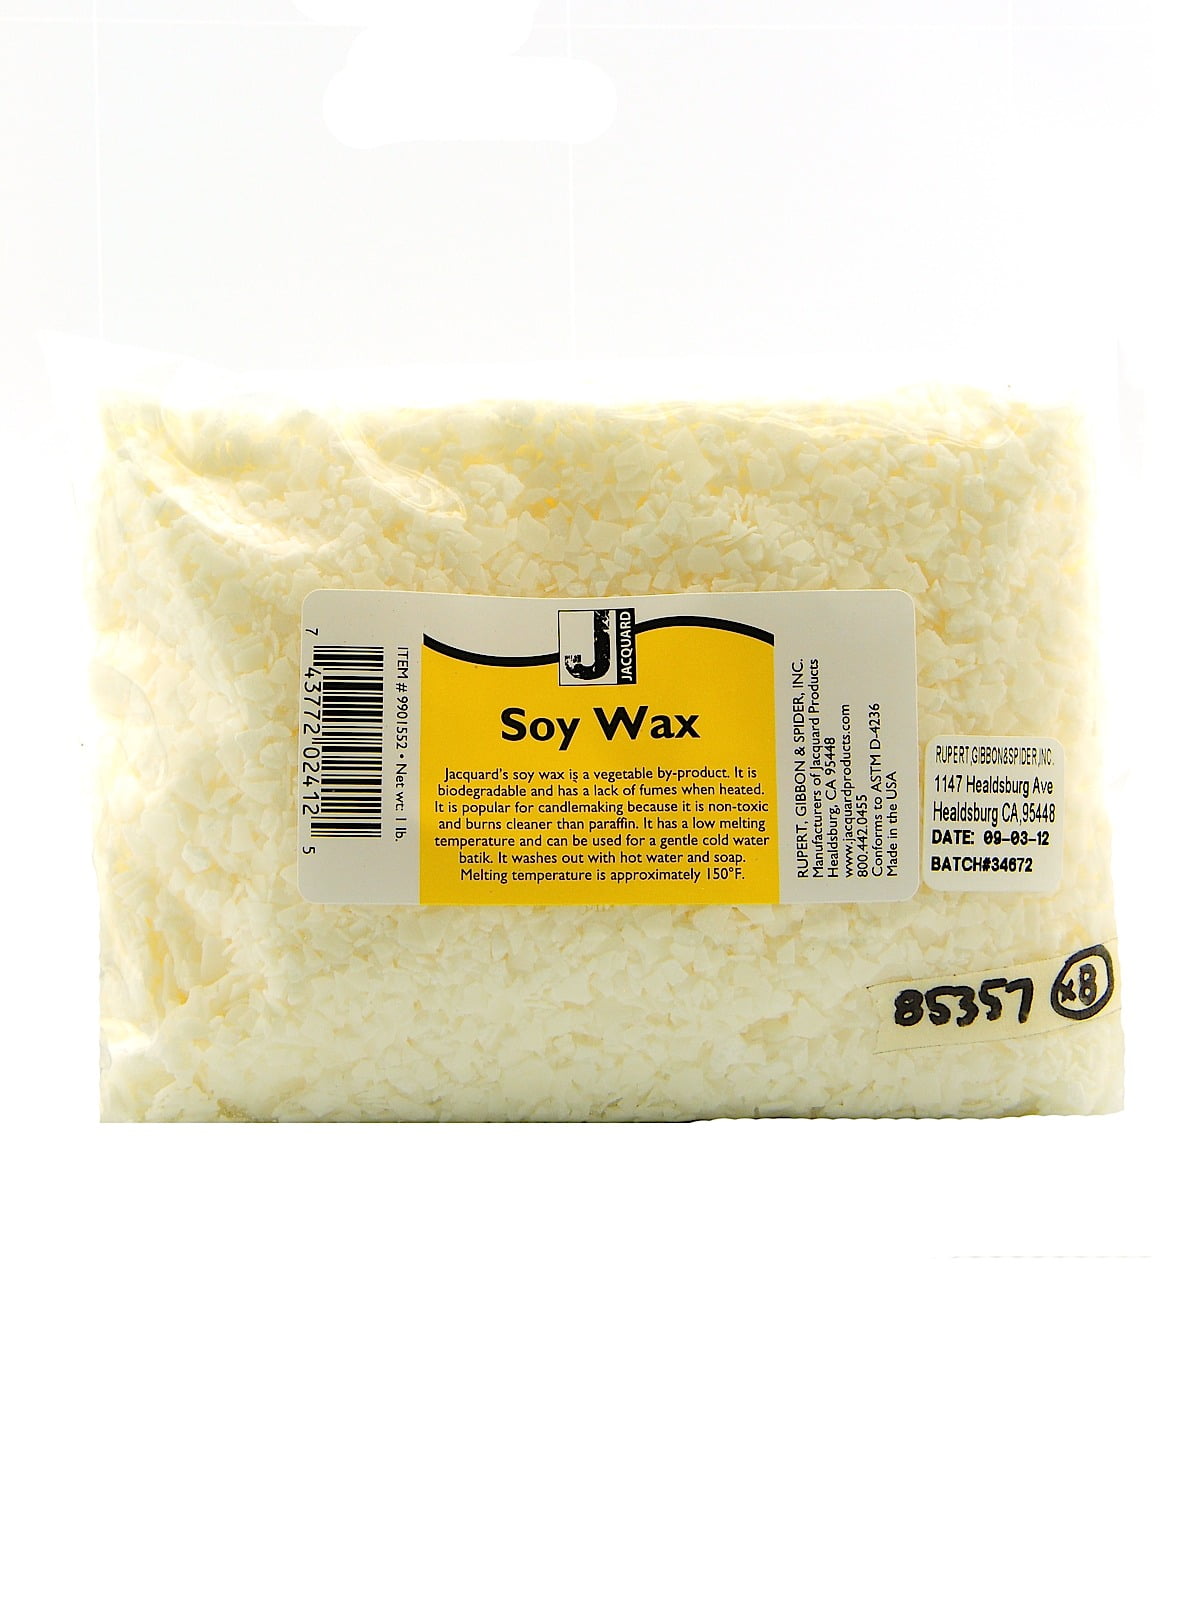 Soy Wax 1 lb. (pack of 4) 